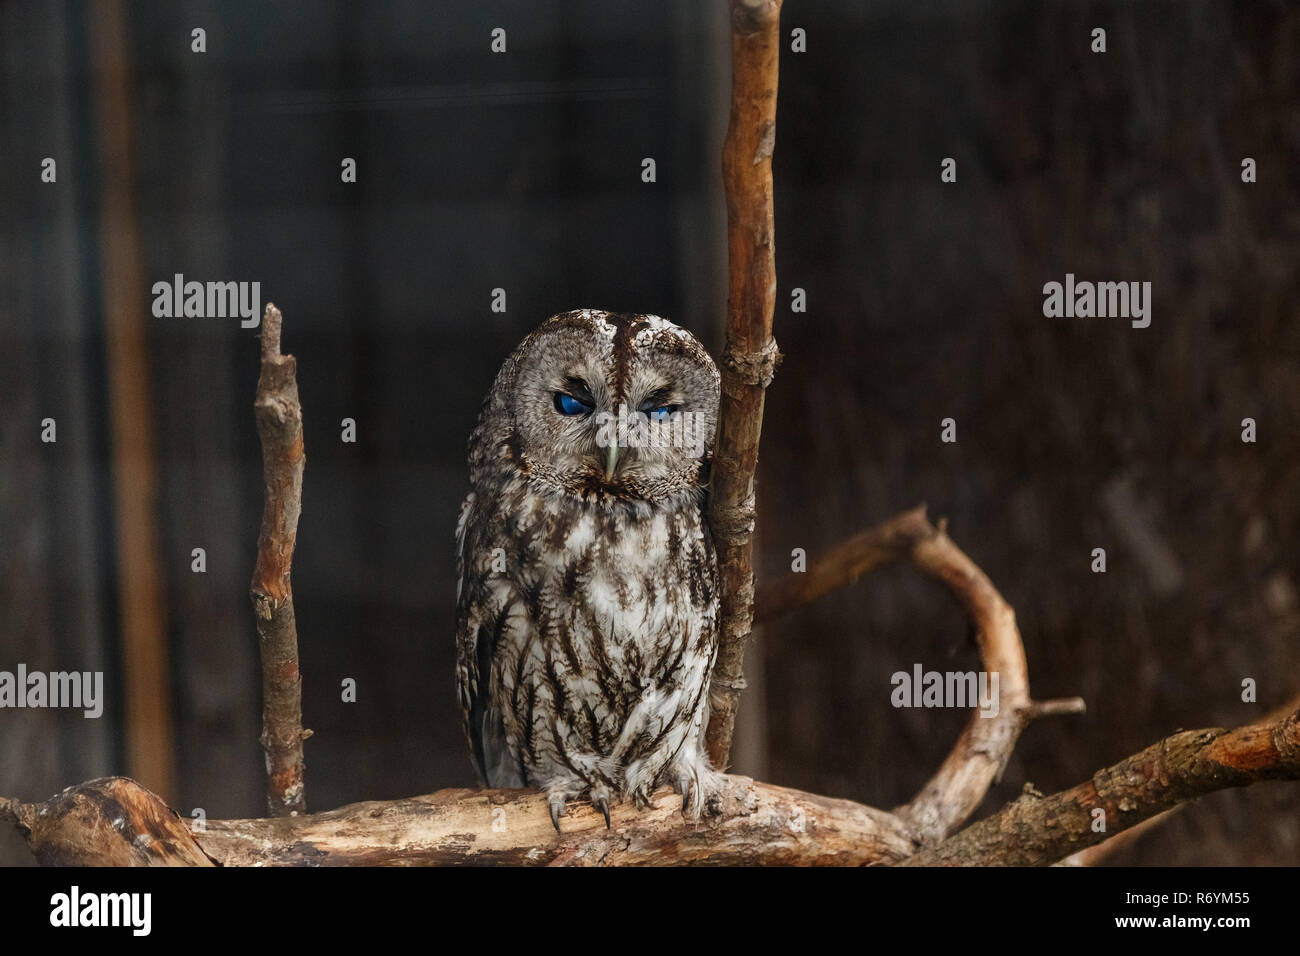 Gray owl in a cage Stock Photo